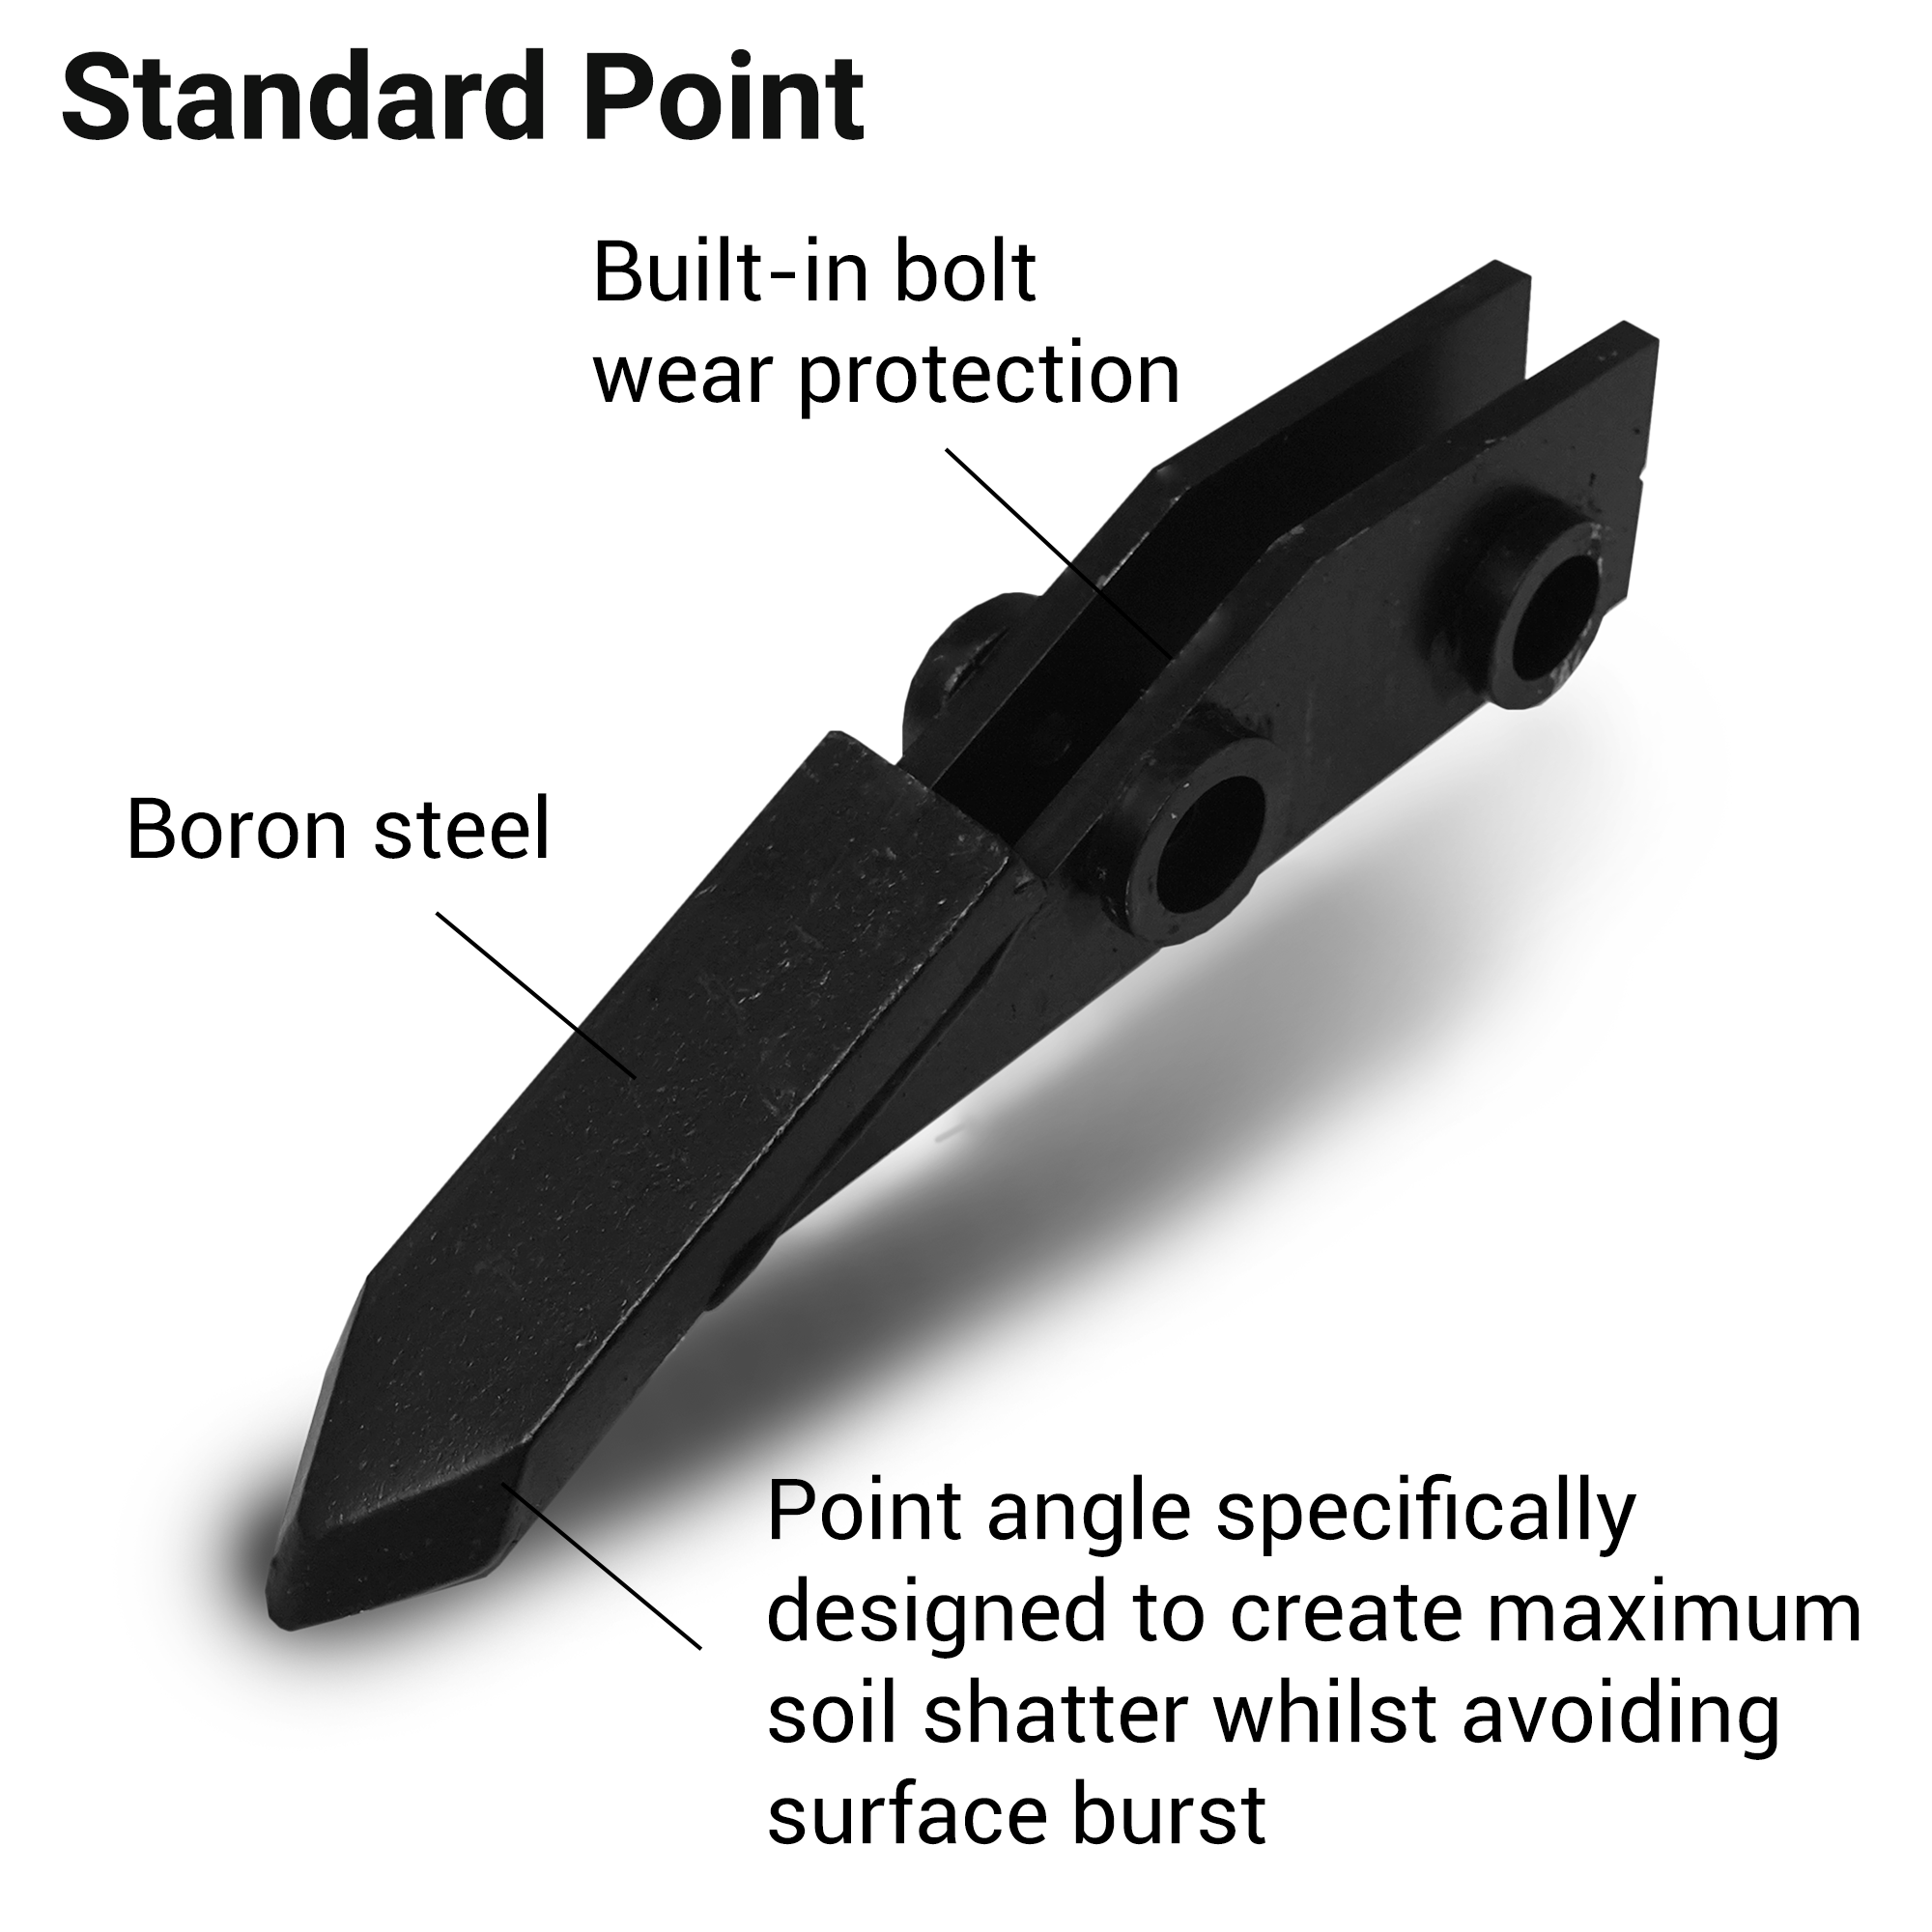 Standard OPICO Sward Lifter Point key features